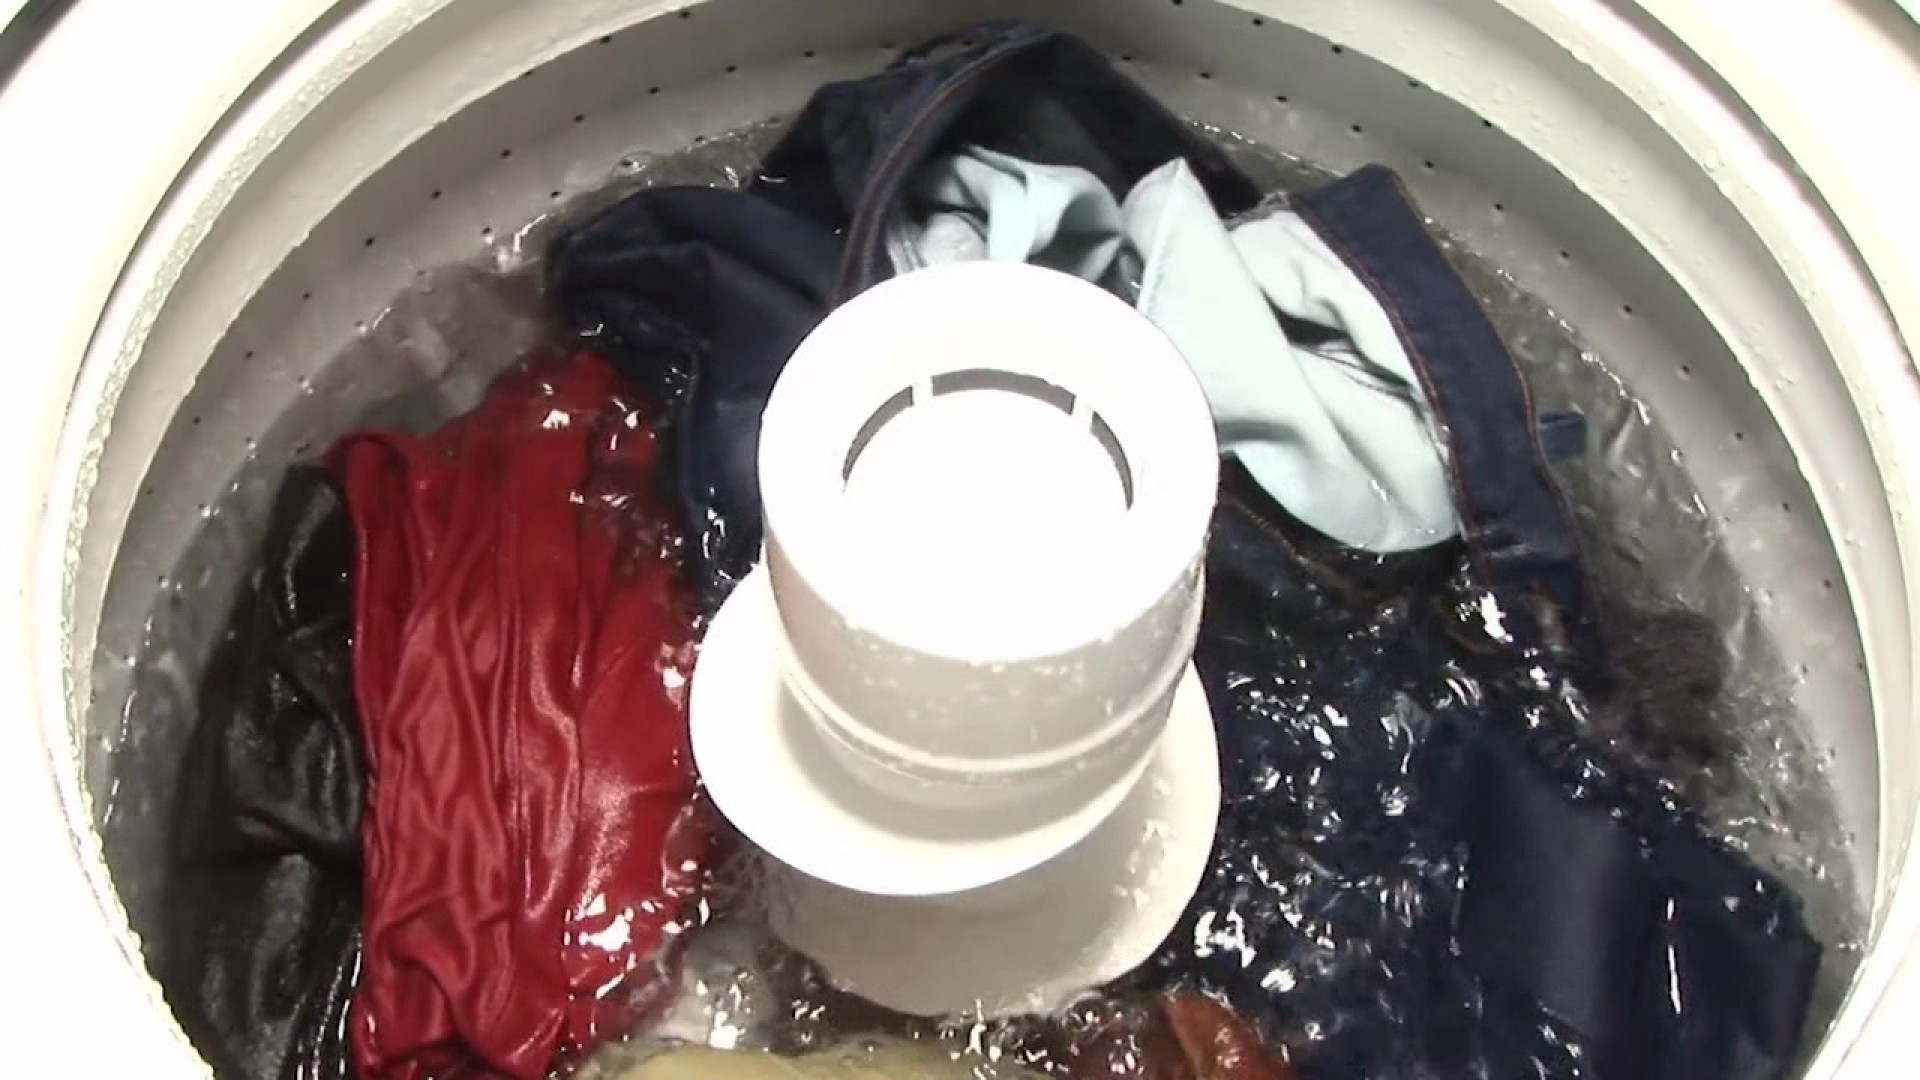 Is Your Laundry Really Clean?